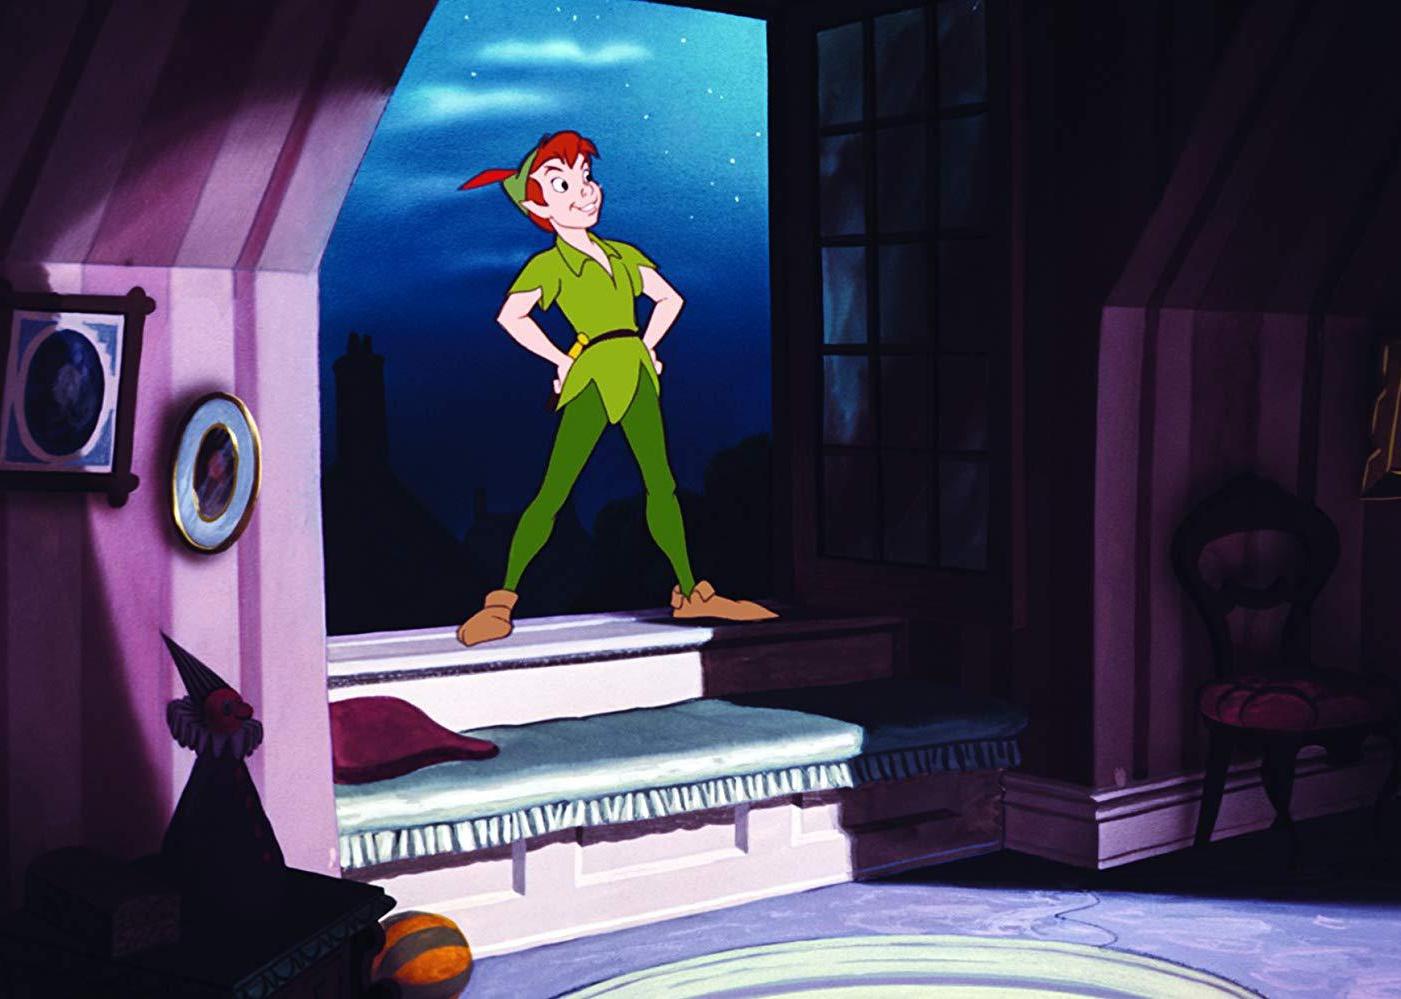 A cartoon of Peter Pan with red hair and a green suit coming in a bedroom window.